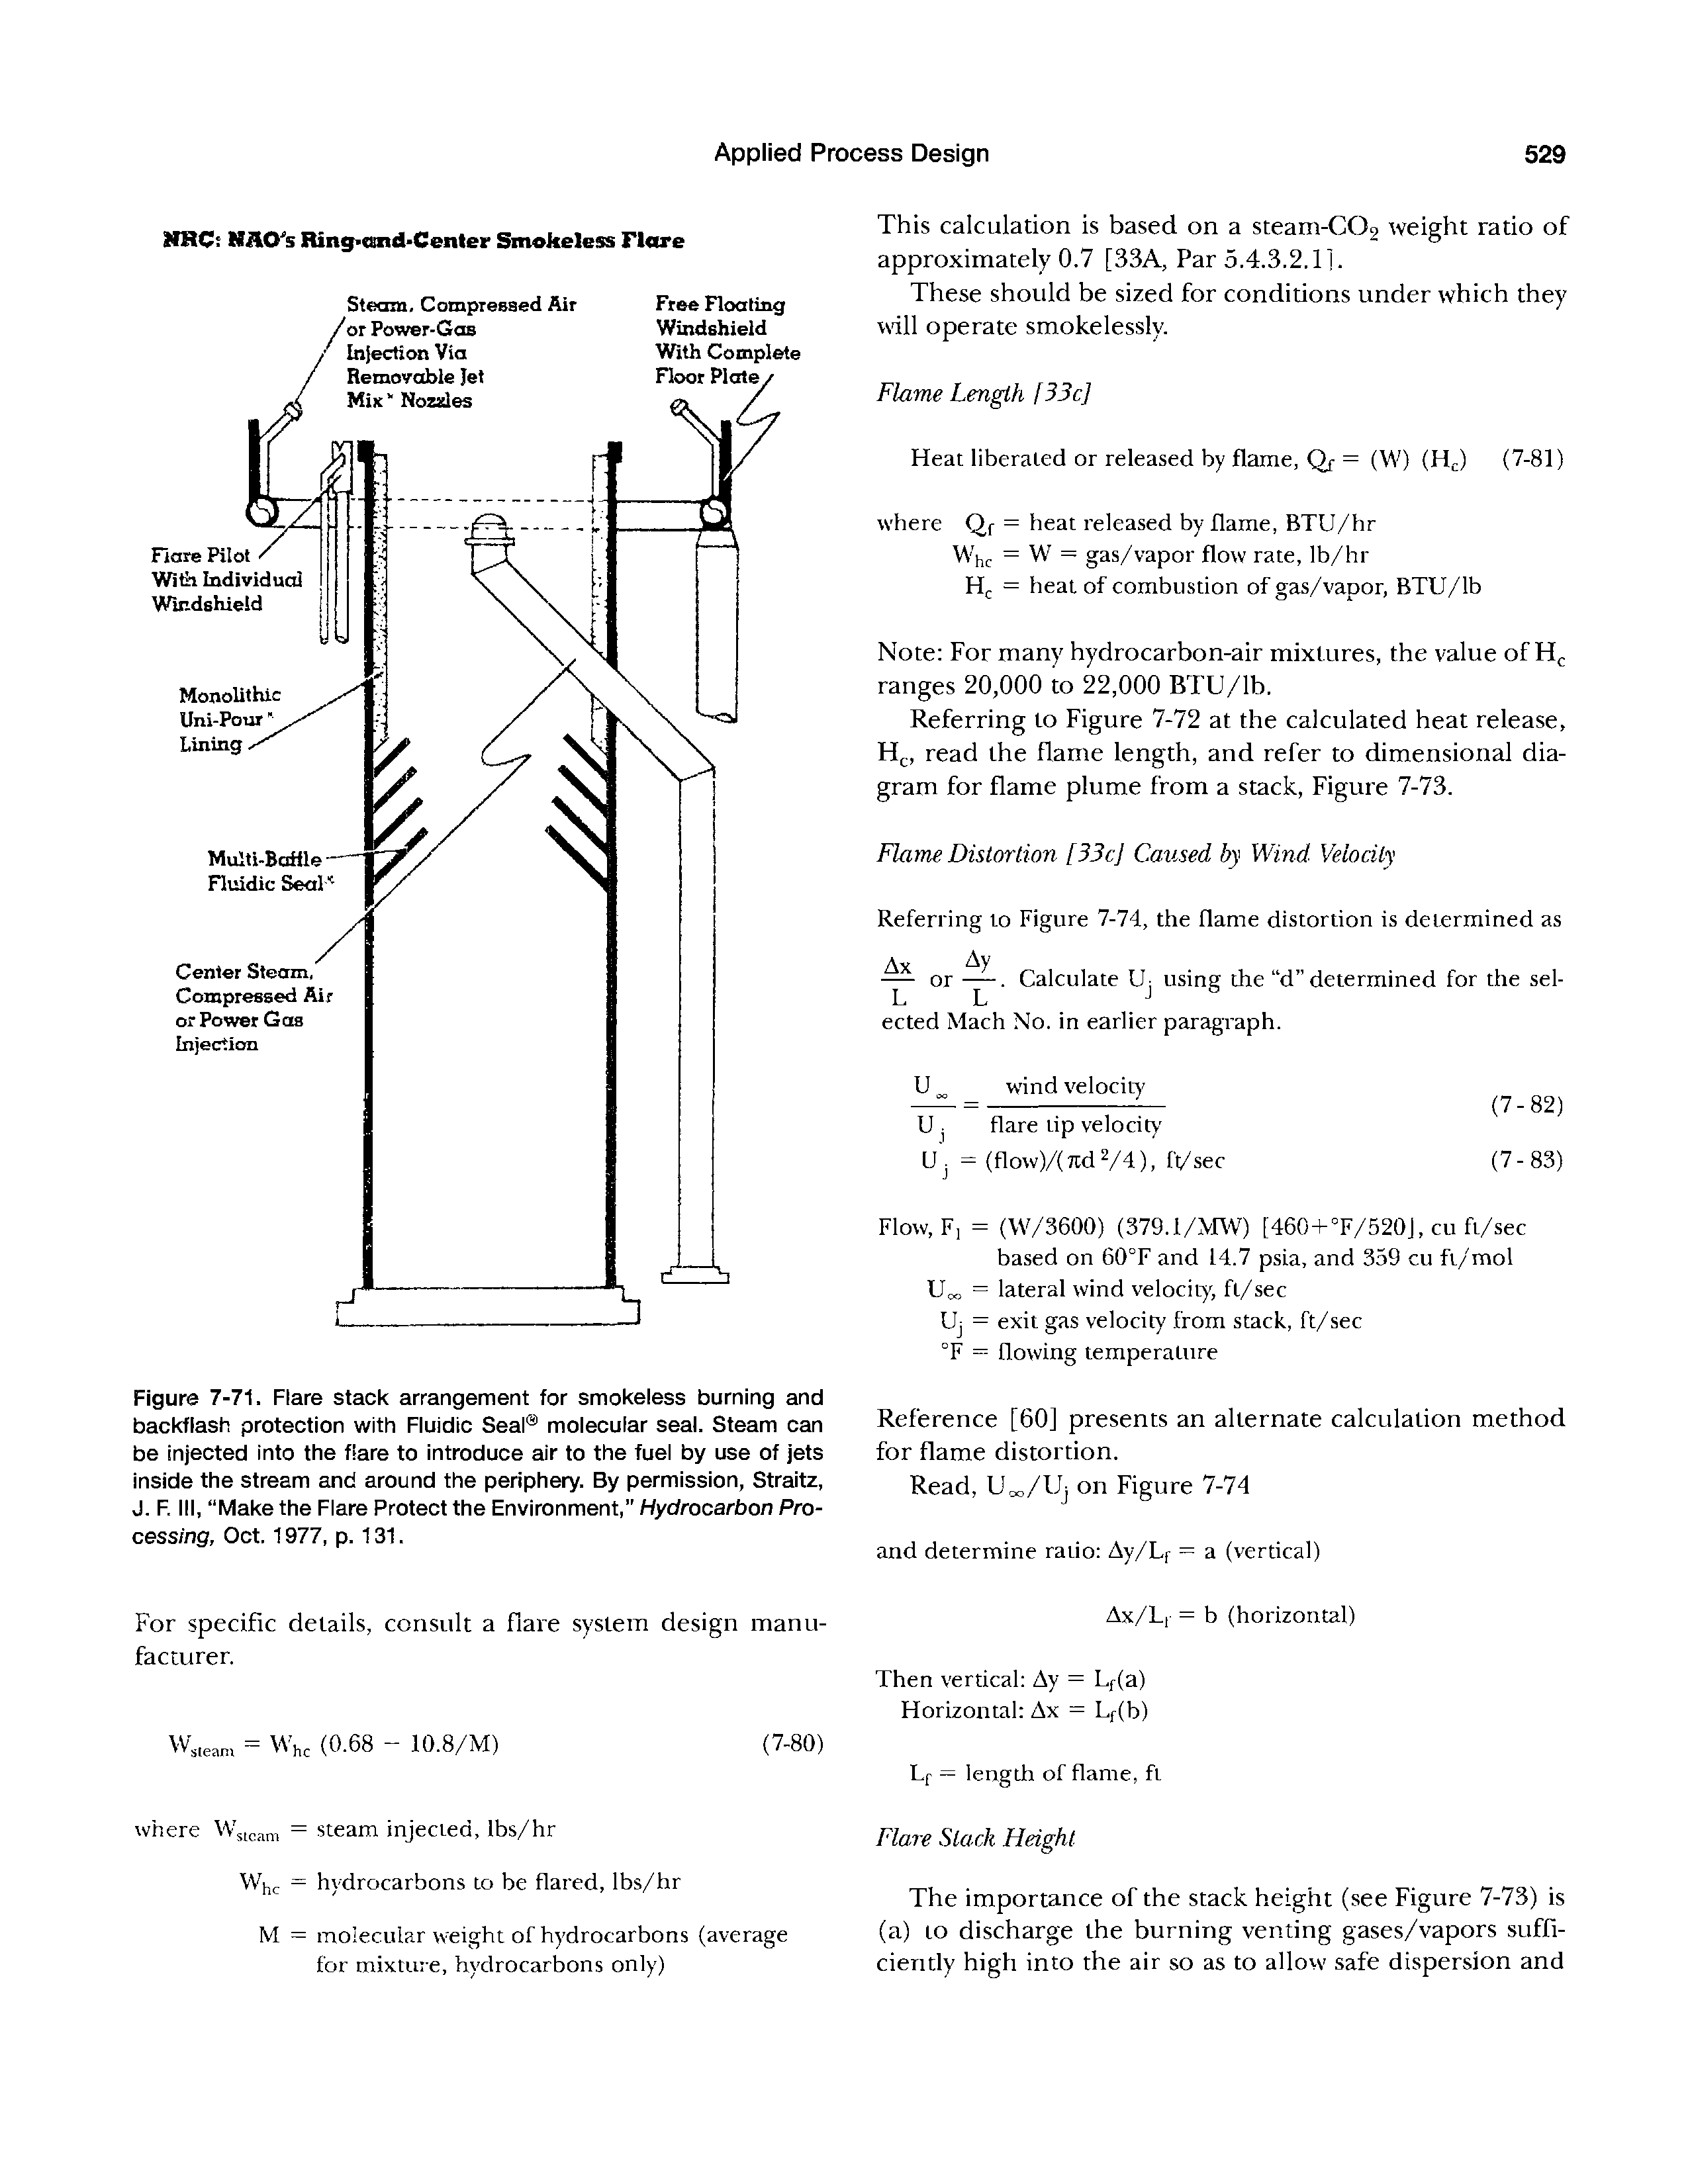 Figure 7-71. Flare stack arrangement for smokeless burning and backflash protection with Fluidic Seal molecular seal. Steam can be injected into the flare to introduce air to the fuel by use of jets inside the stream and around the periphery. By permission, Straitz, J. F. Ill, Make the Flare Protect the Environment," Hydrocarbon Processing, Oct. 1977, p. 131.